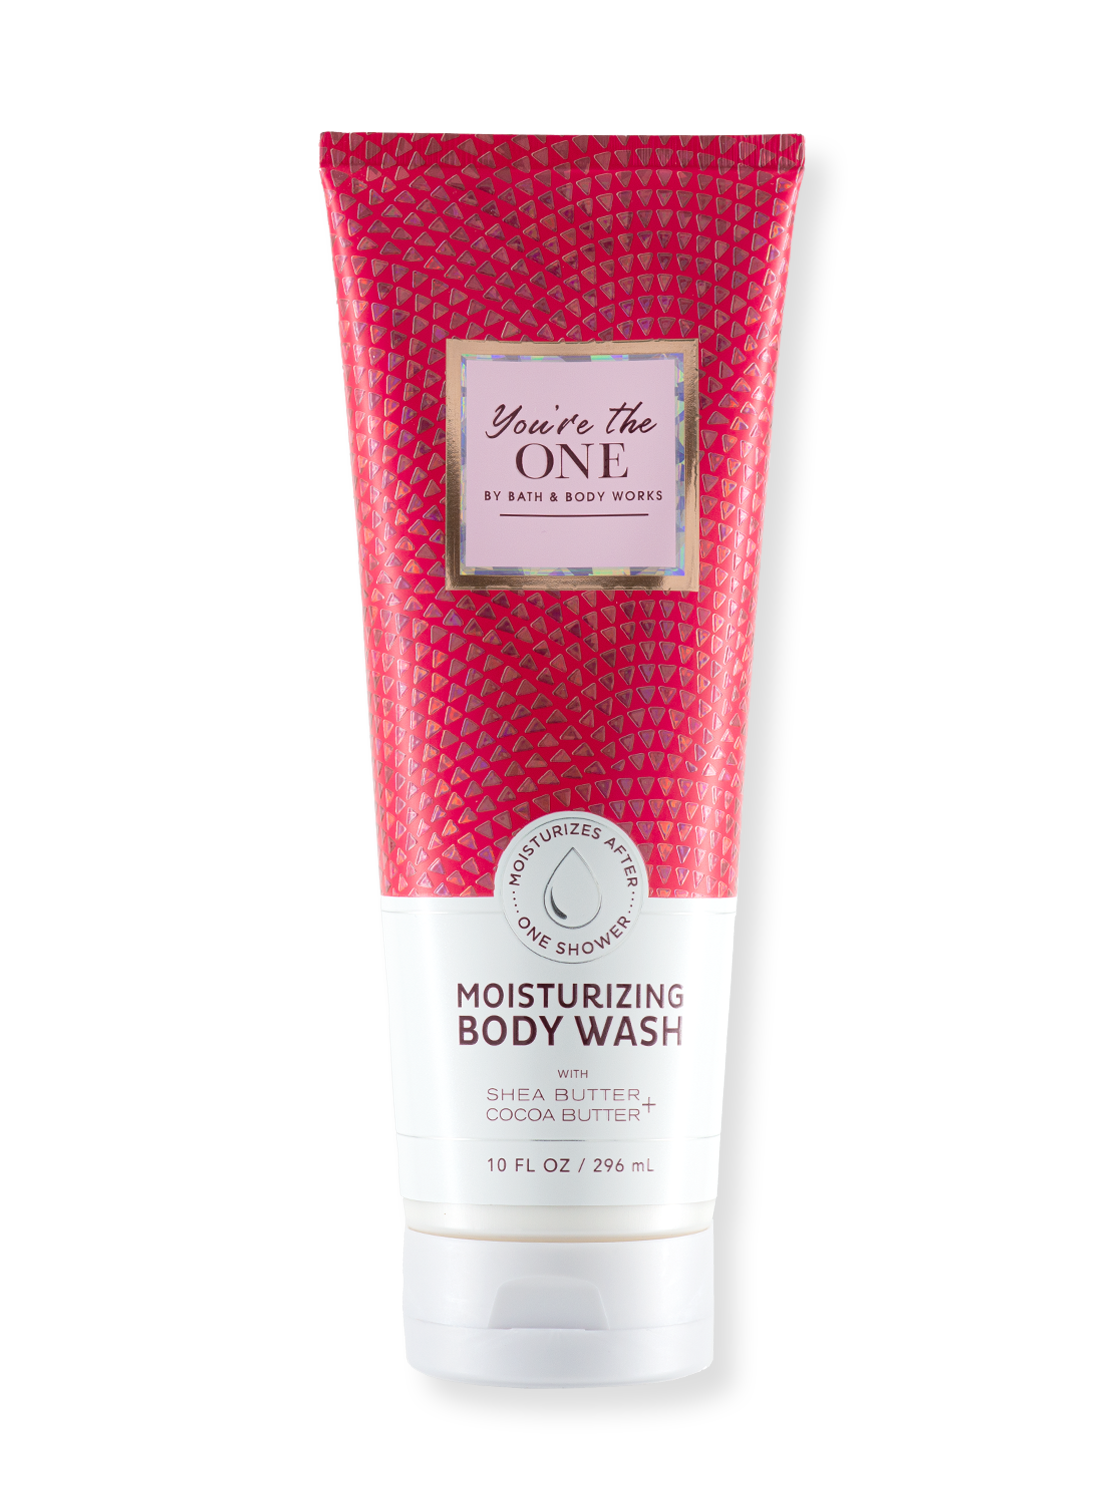 SALE - Body Wash - You're the one - 296ml